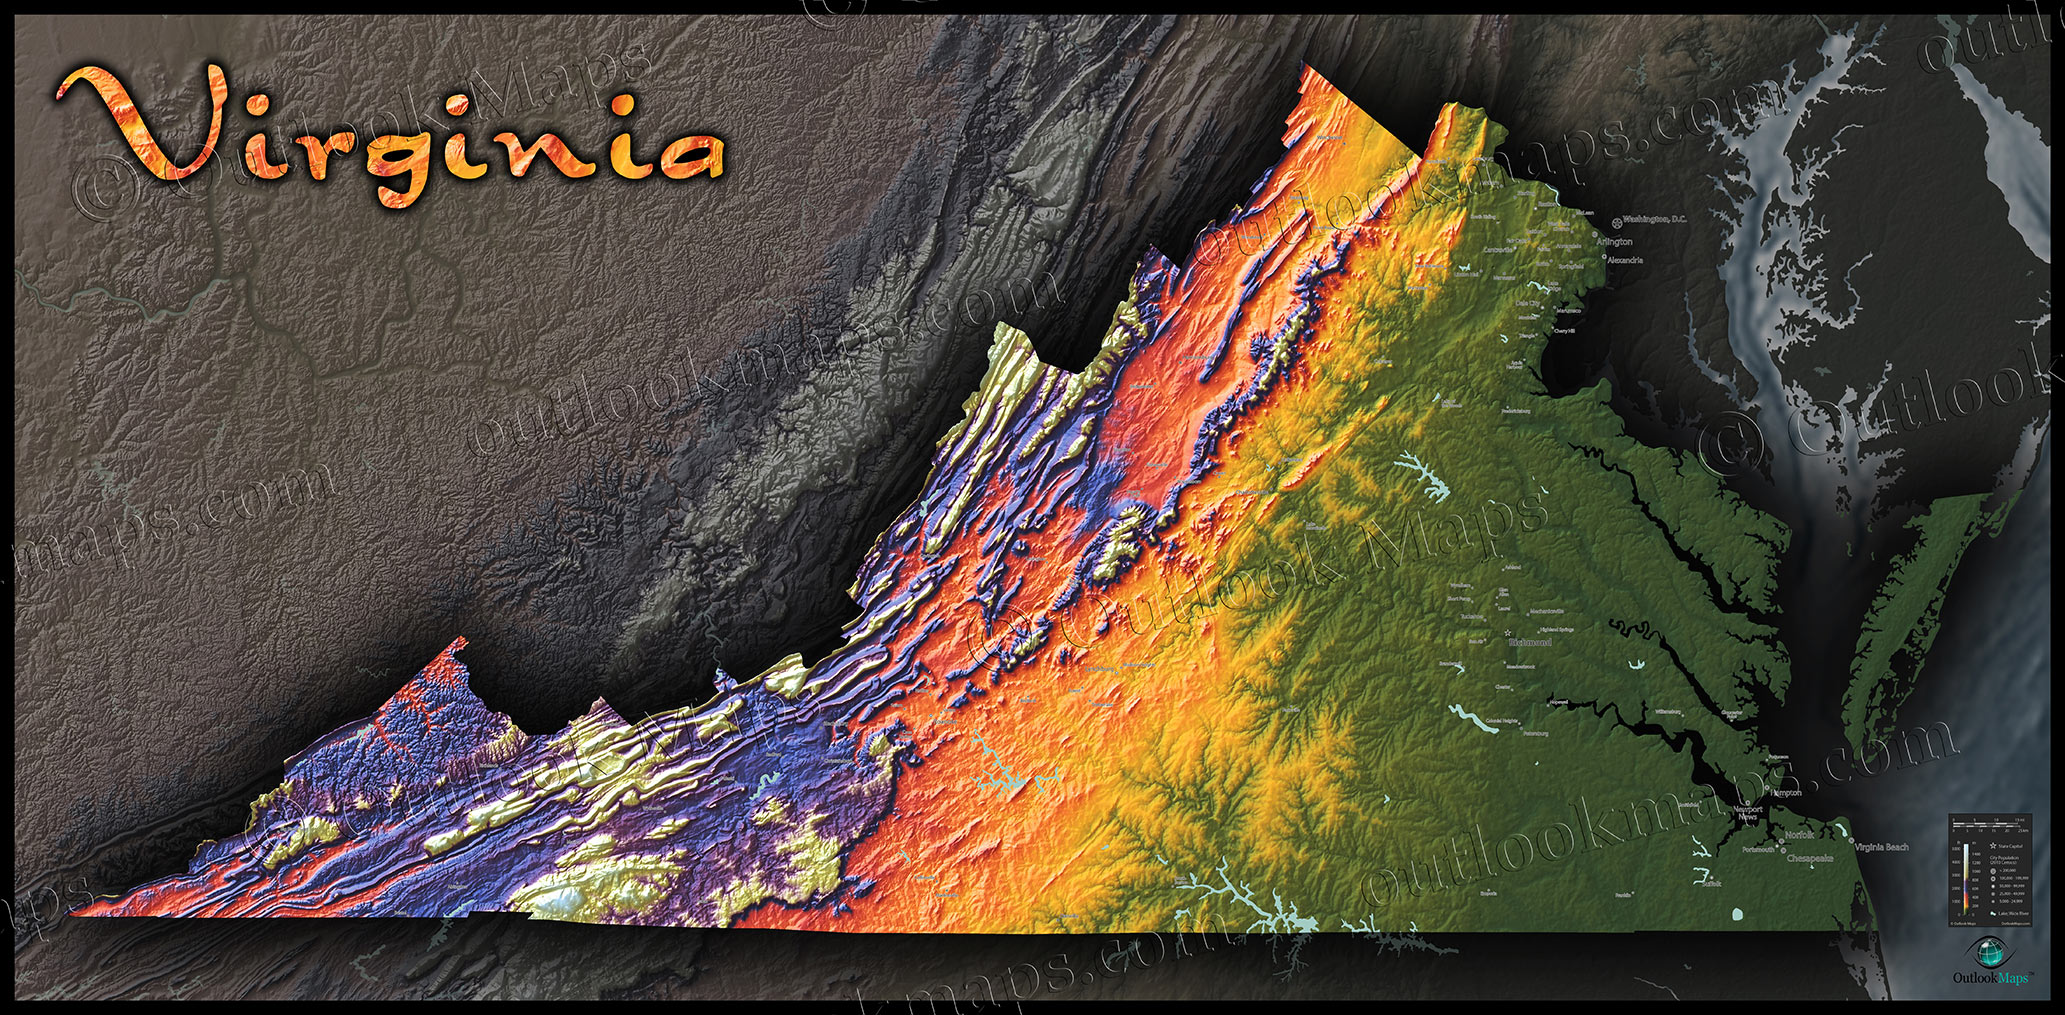 topographical map of virginia mountains